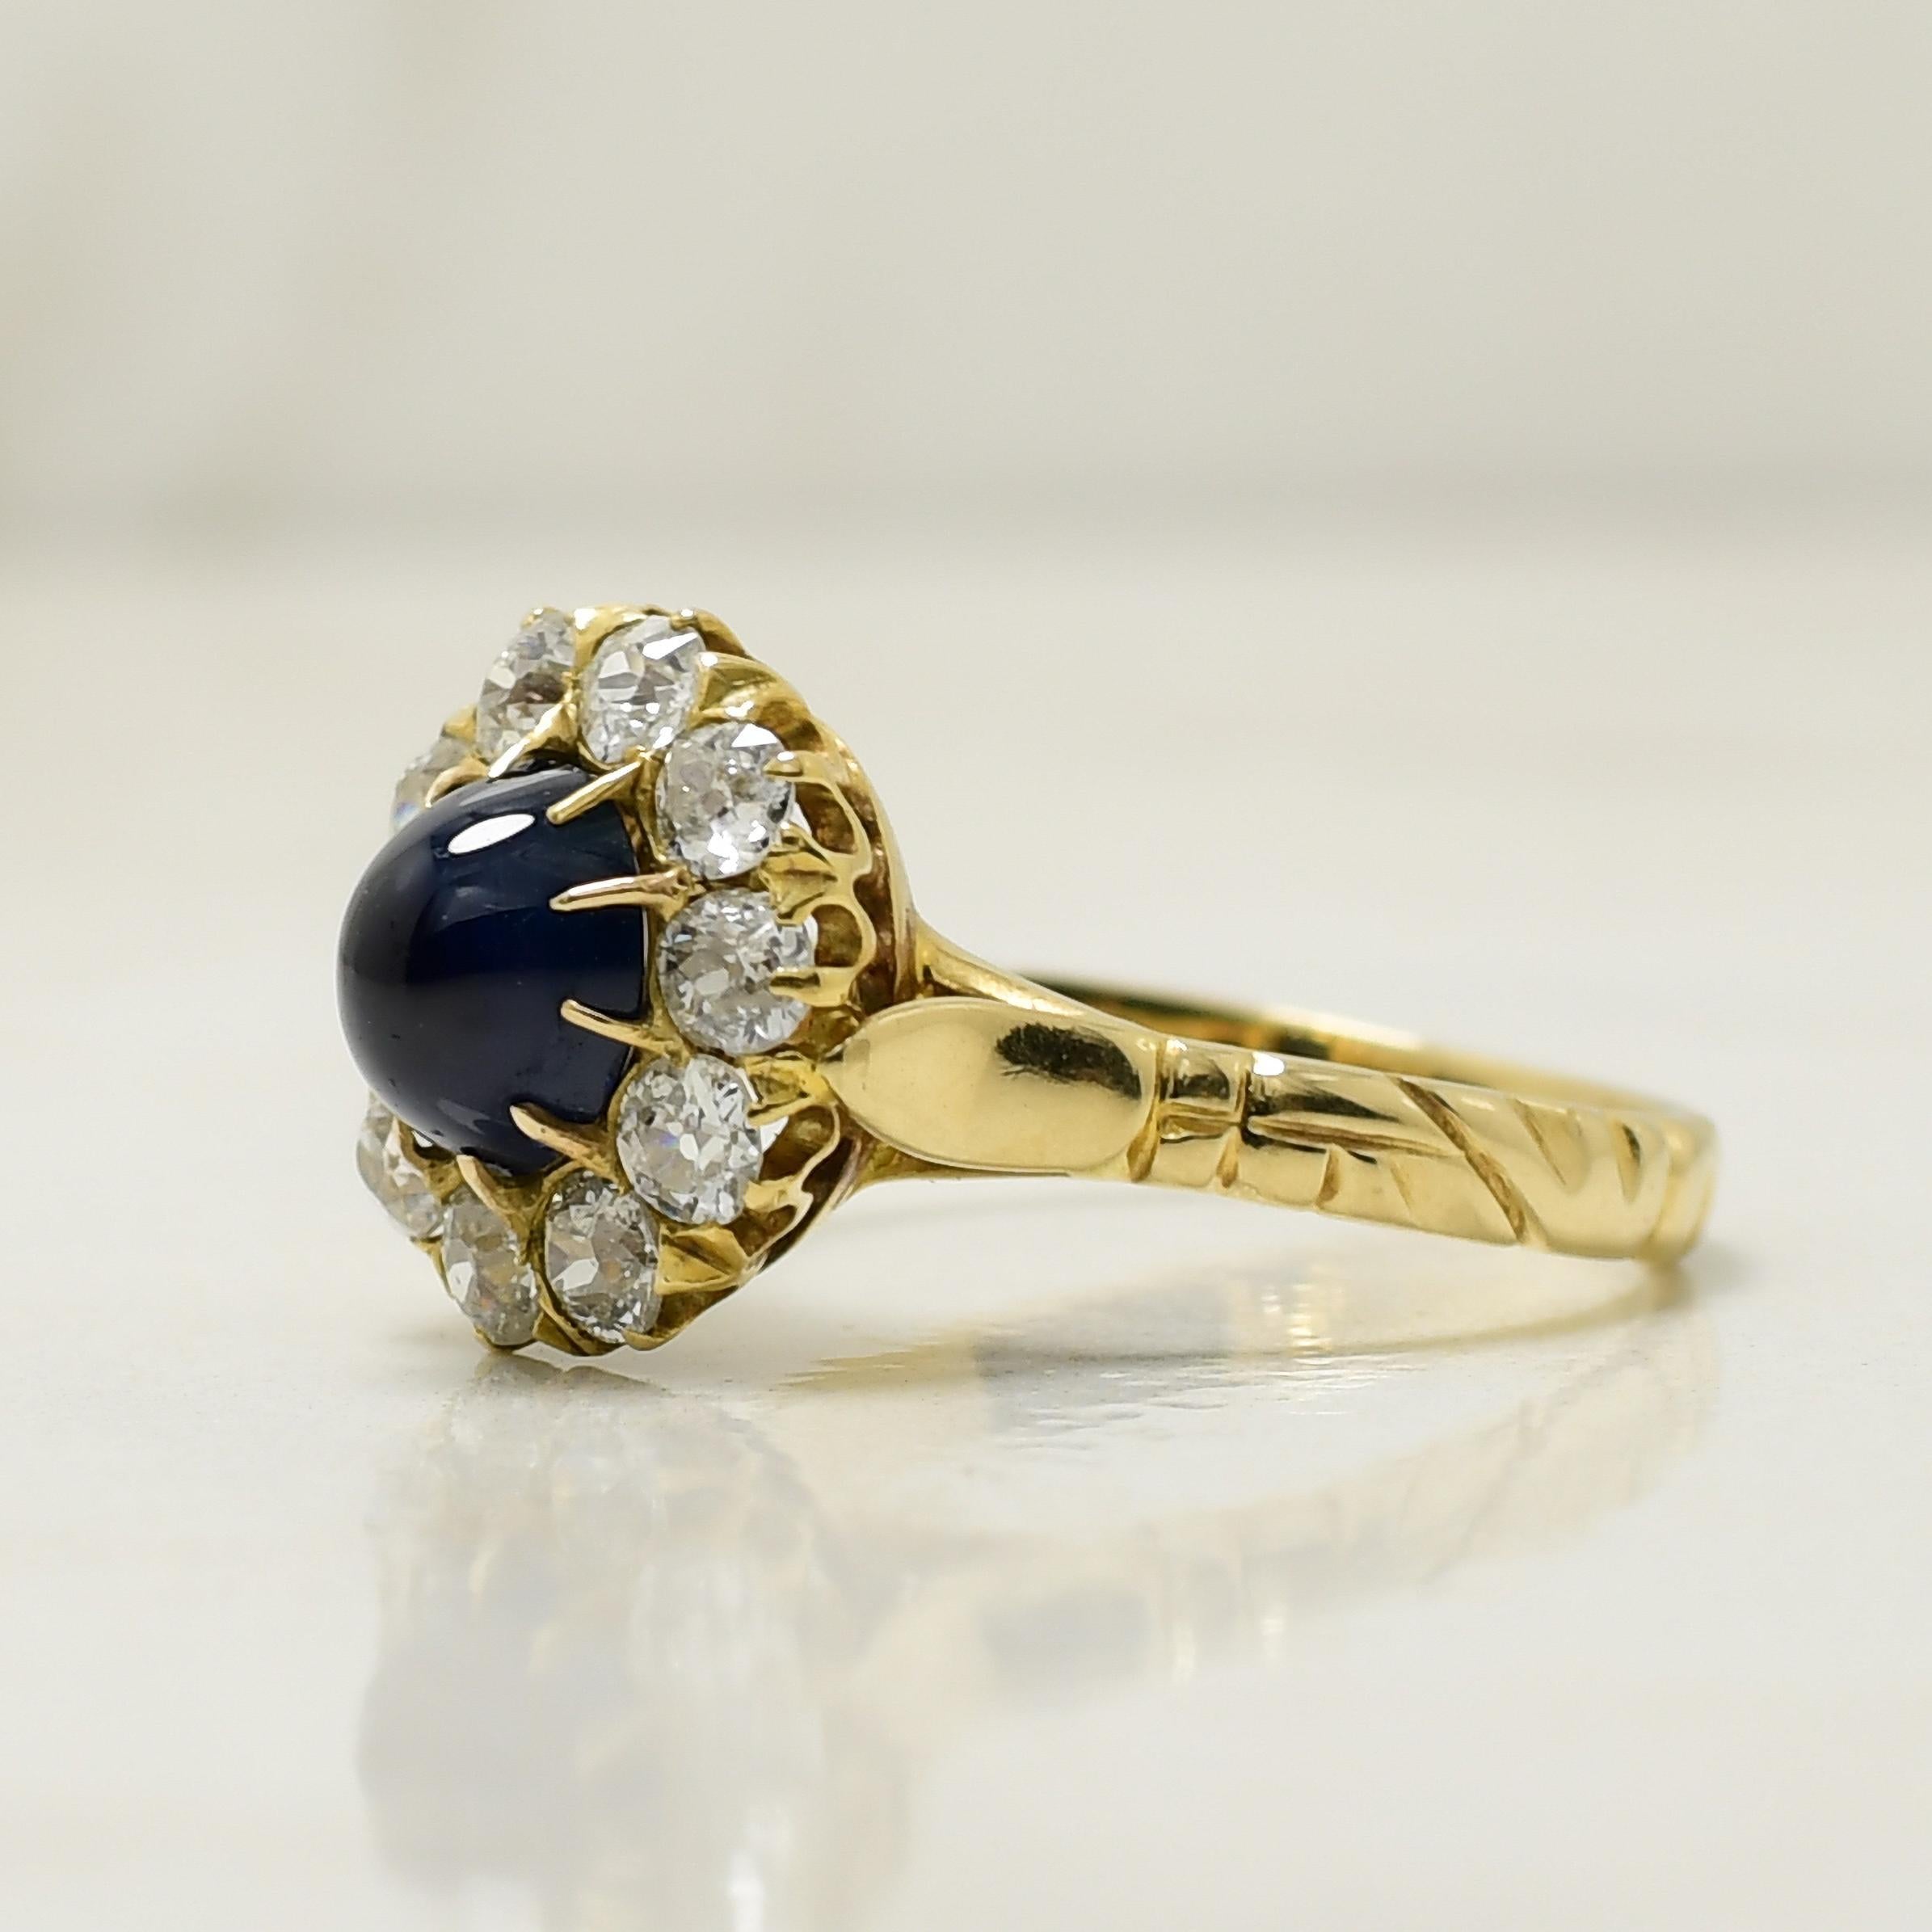 This ring is a testament to exceptional craftsmanship. Fashioned in lustrous 14K yellow gold, it showcases an organic engraving starting at the shank and gracefully wrapping around the finger, leading up to the cathedral shanks. In the heart of